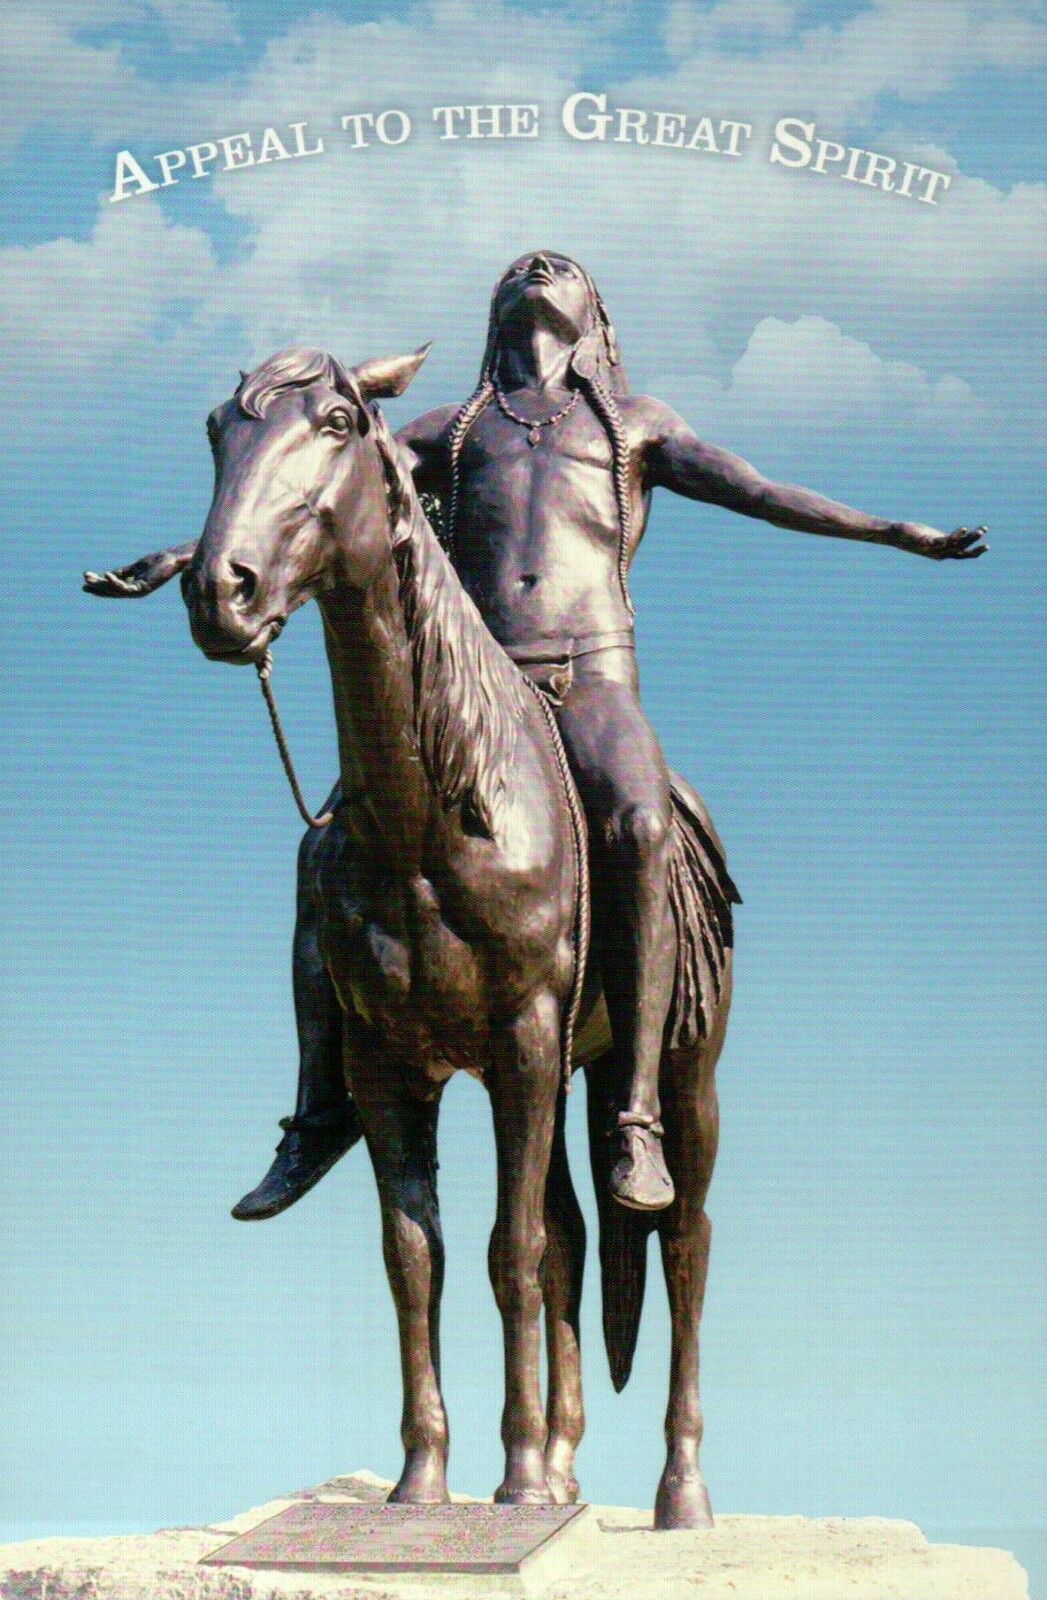 Appeal To The Great Spirit Native American Indian Horse Statue Oklahoma Postcard